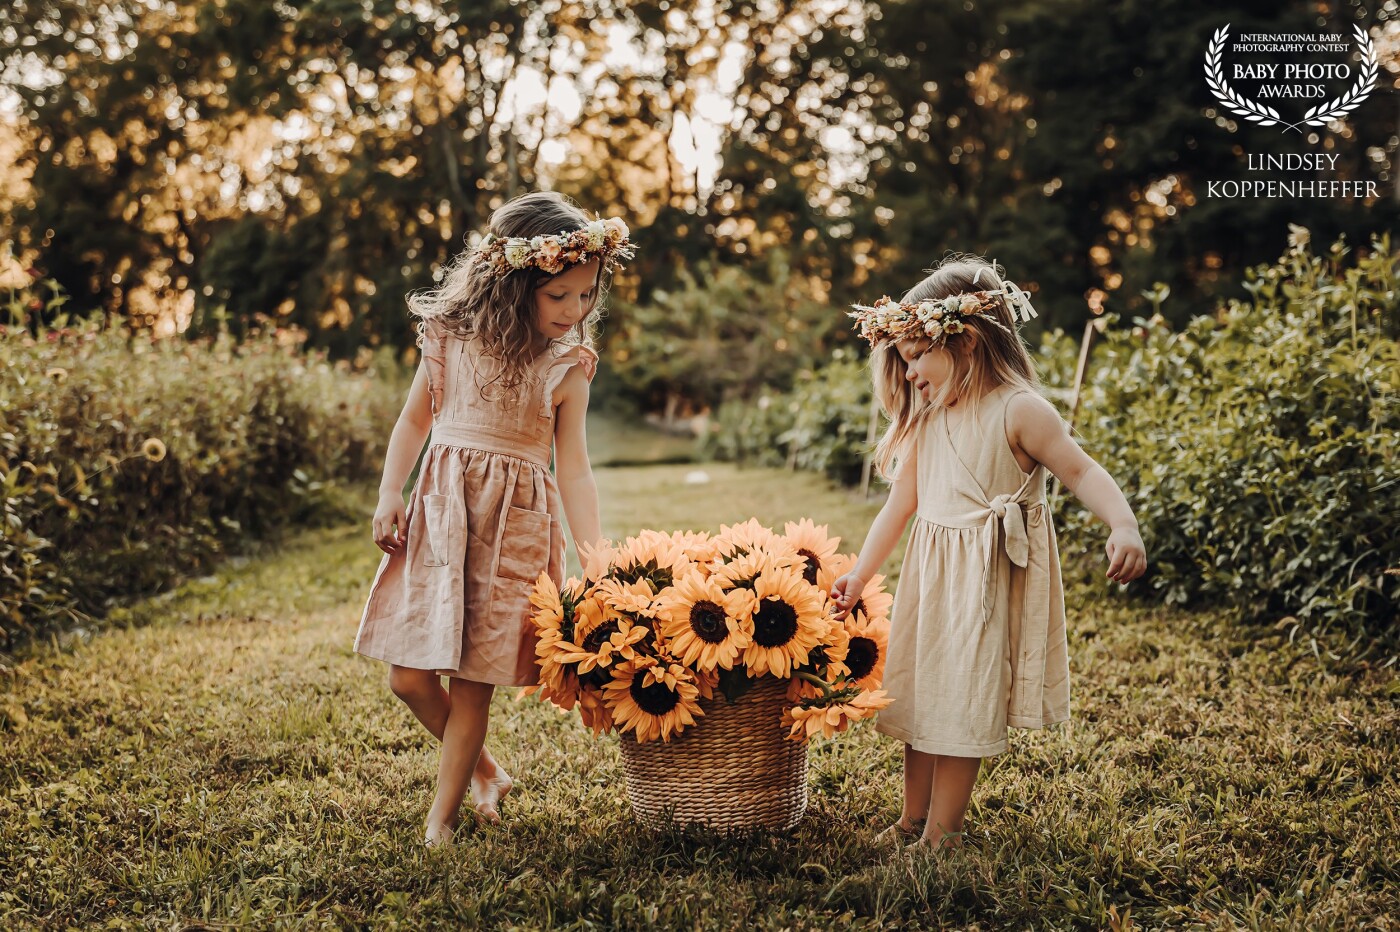 The end of the summer harvest means sometimes we must say goodbye to the prettiest of flowers. But that also means displaying them one final time and preserving their beauty in photographs.